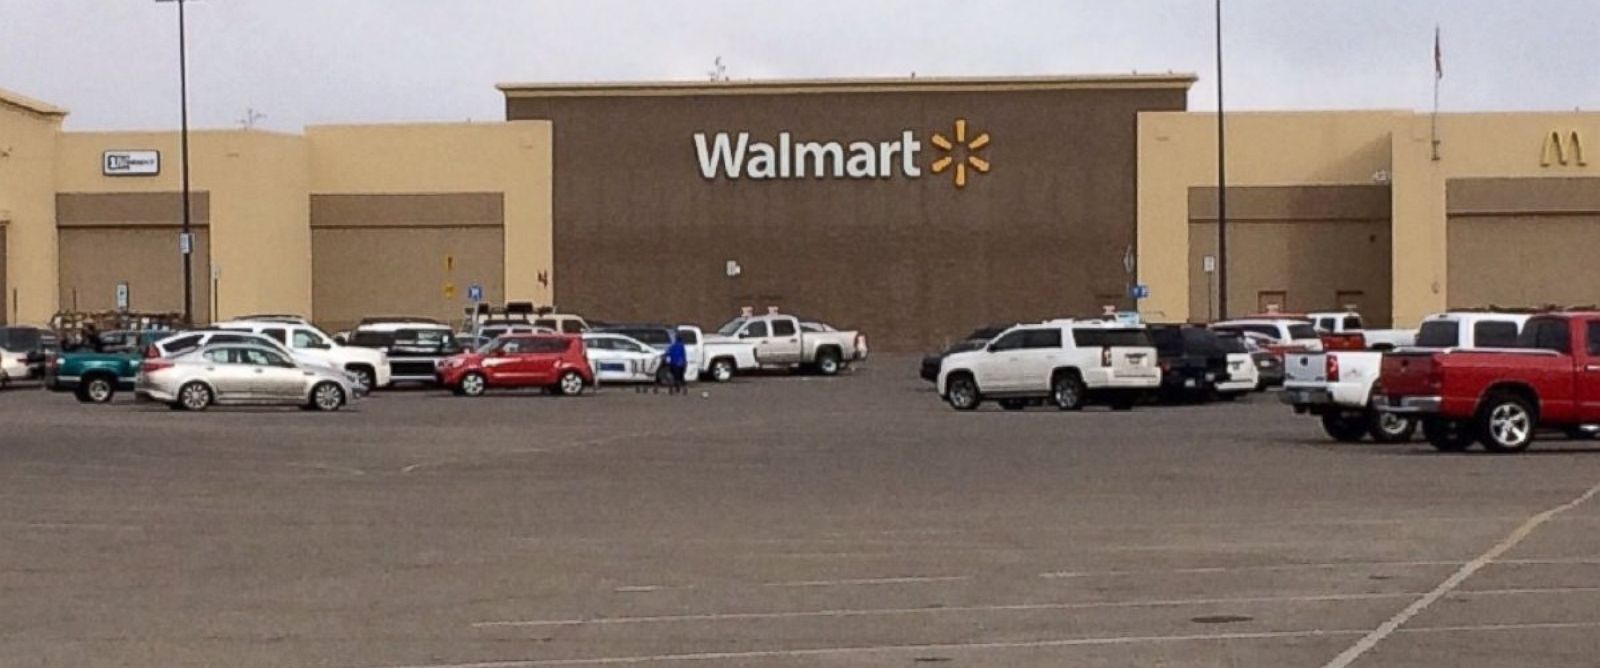 PHOTO: The Amarillo Police Department said there was a report of an armed subject inside a Walmart in along I-27 in Amarillo. 